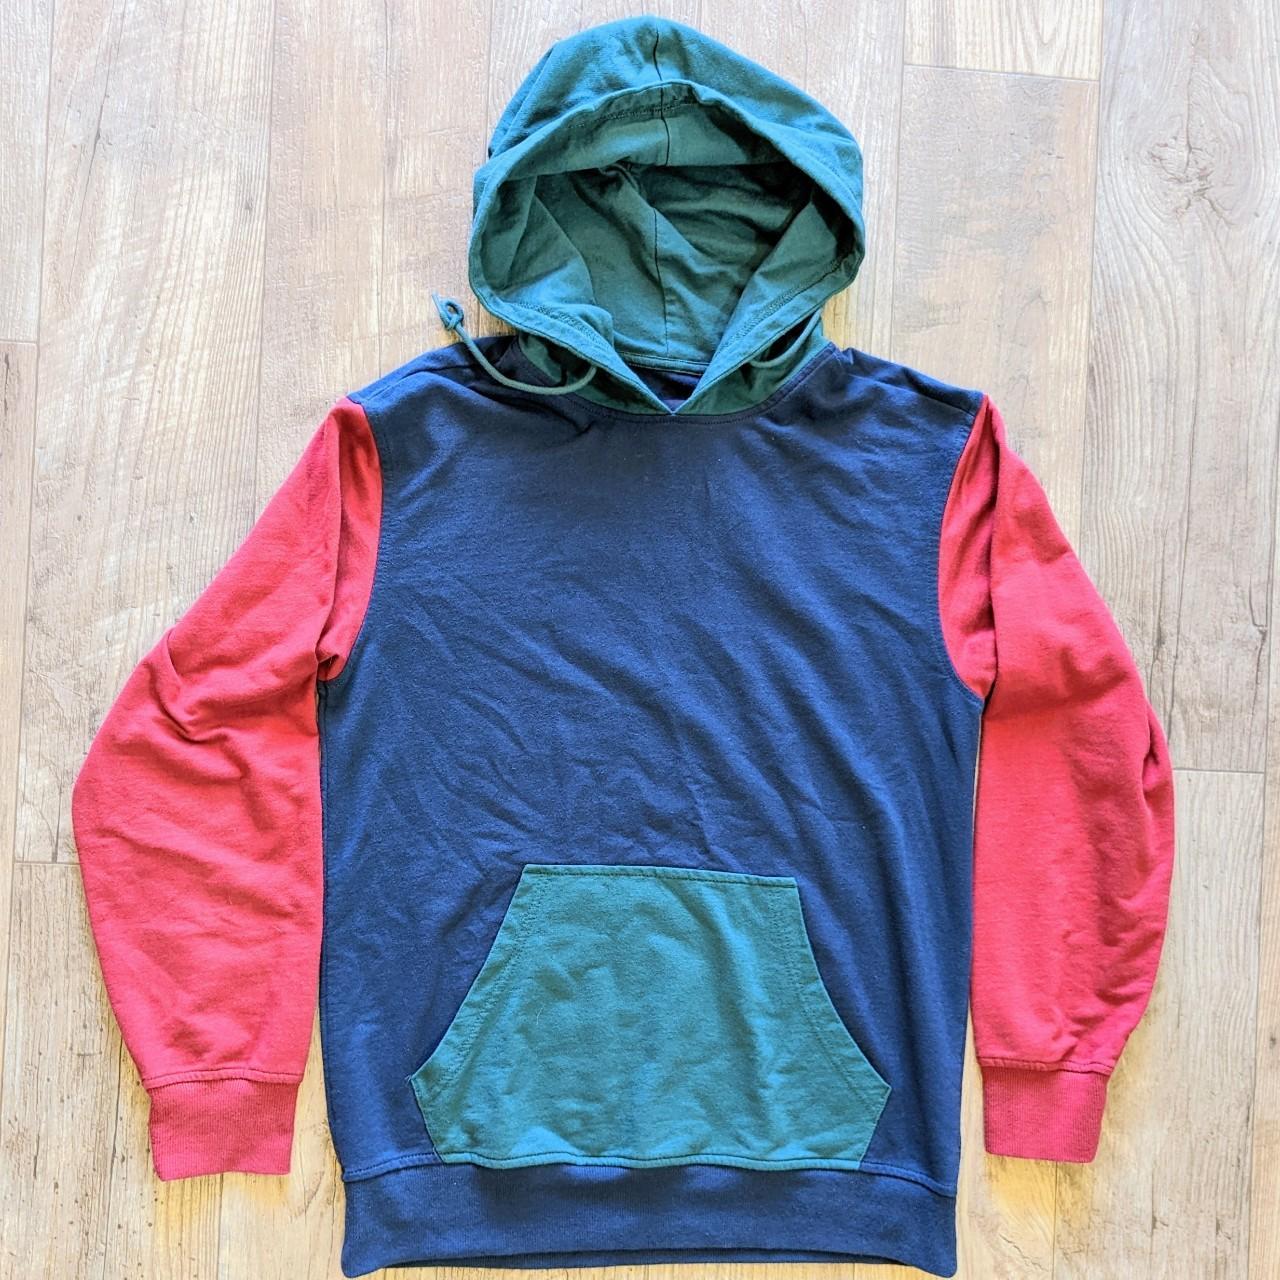 Product Image 1 - Fake Polo hood

Ain't much to